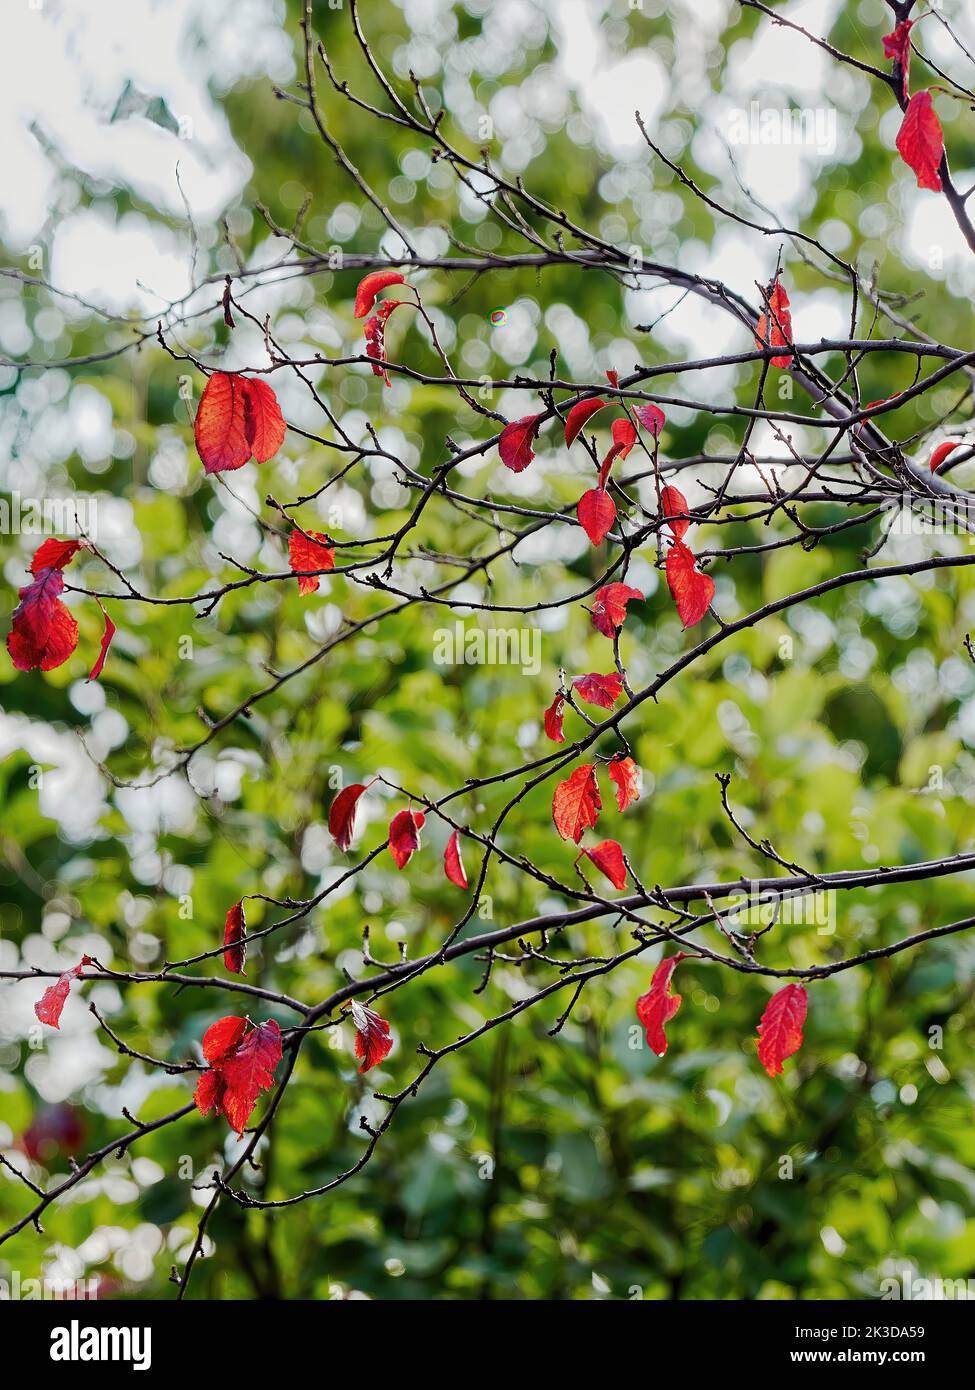 The last few leaves on a cherry tree, bright autumnal red and translucent in the sunlight, against a defocused background of another tree’s greenery. Stock Photo